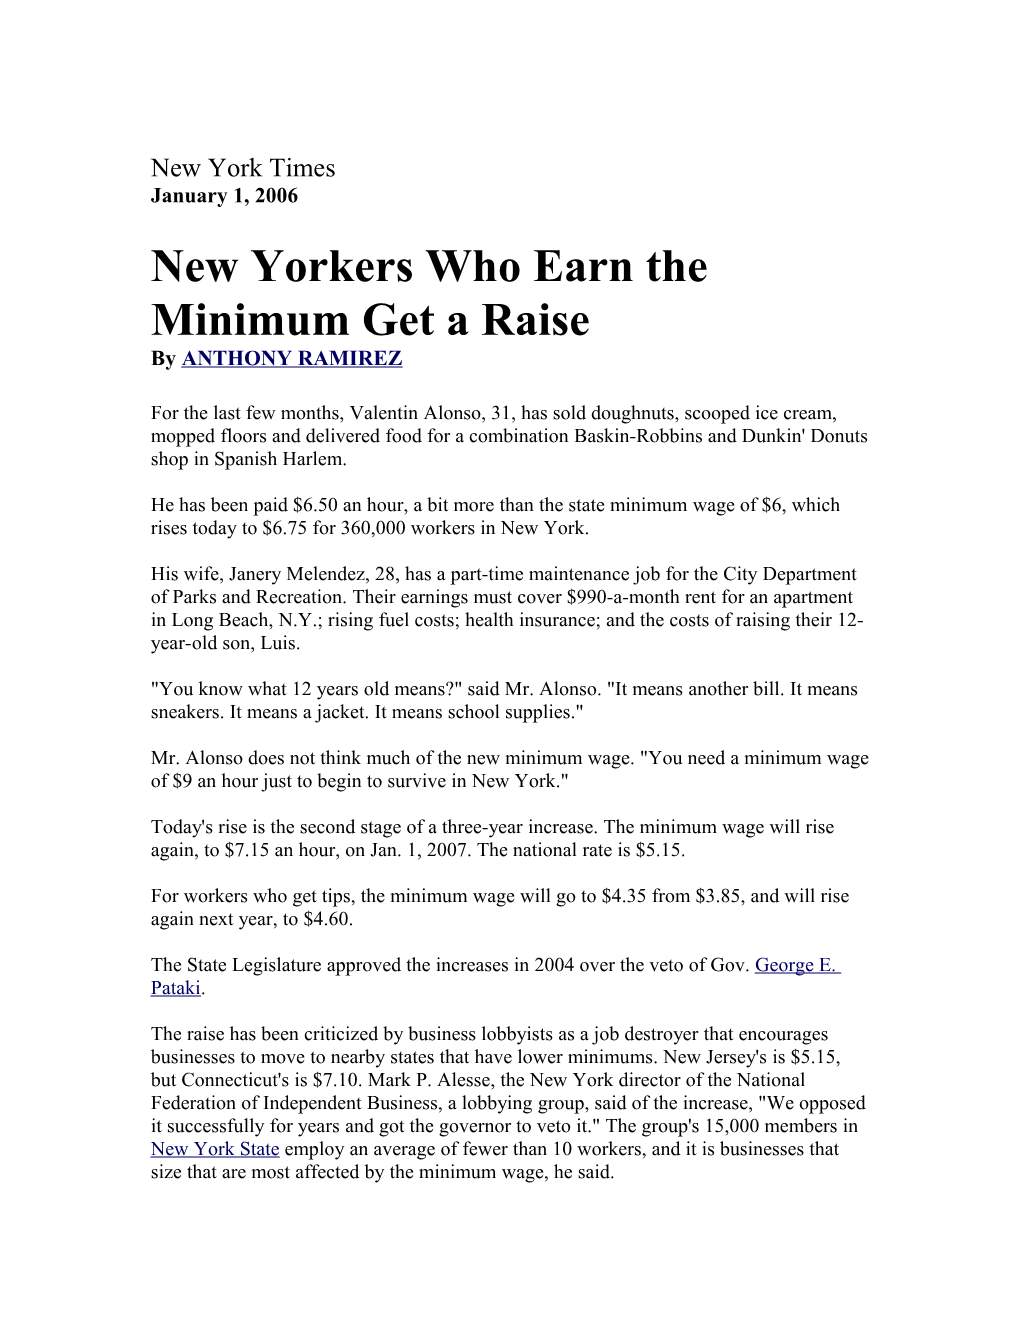 New Yorkers Who Earn the Minimum Get a Raise